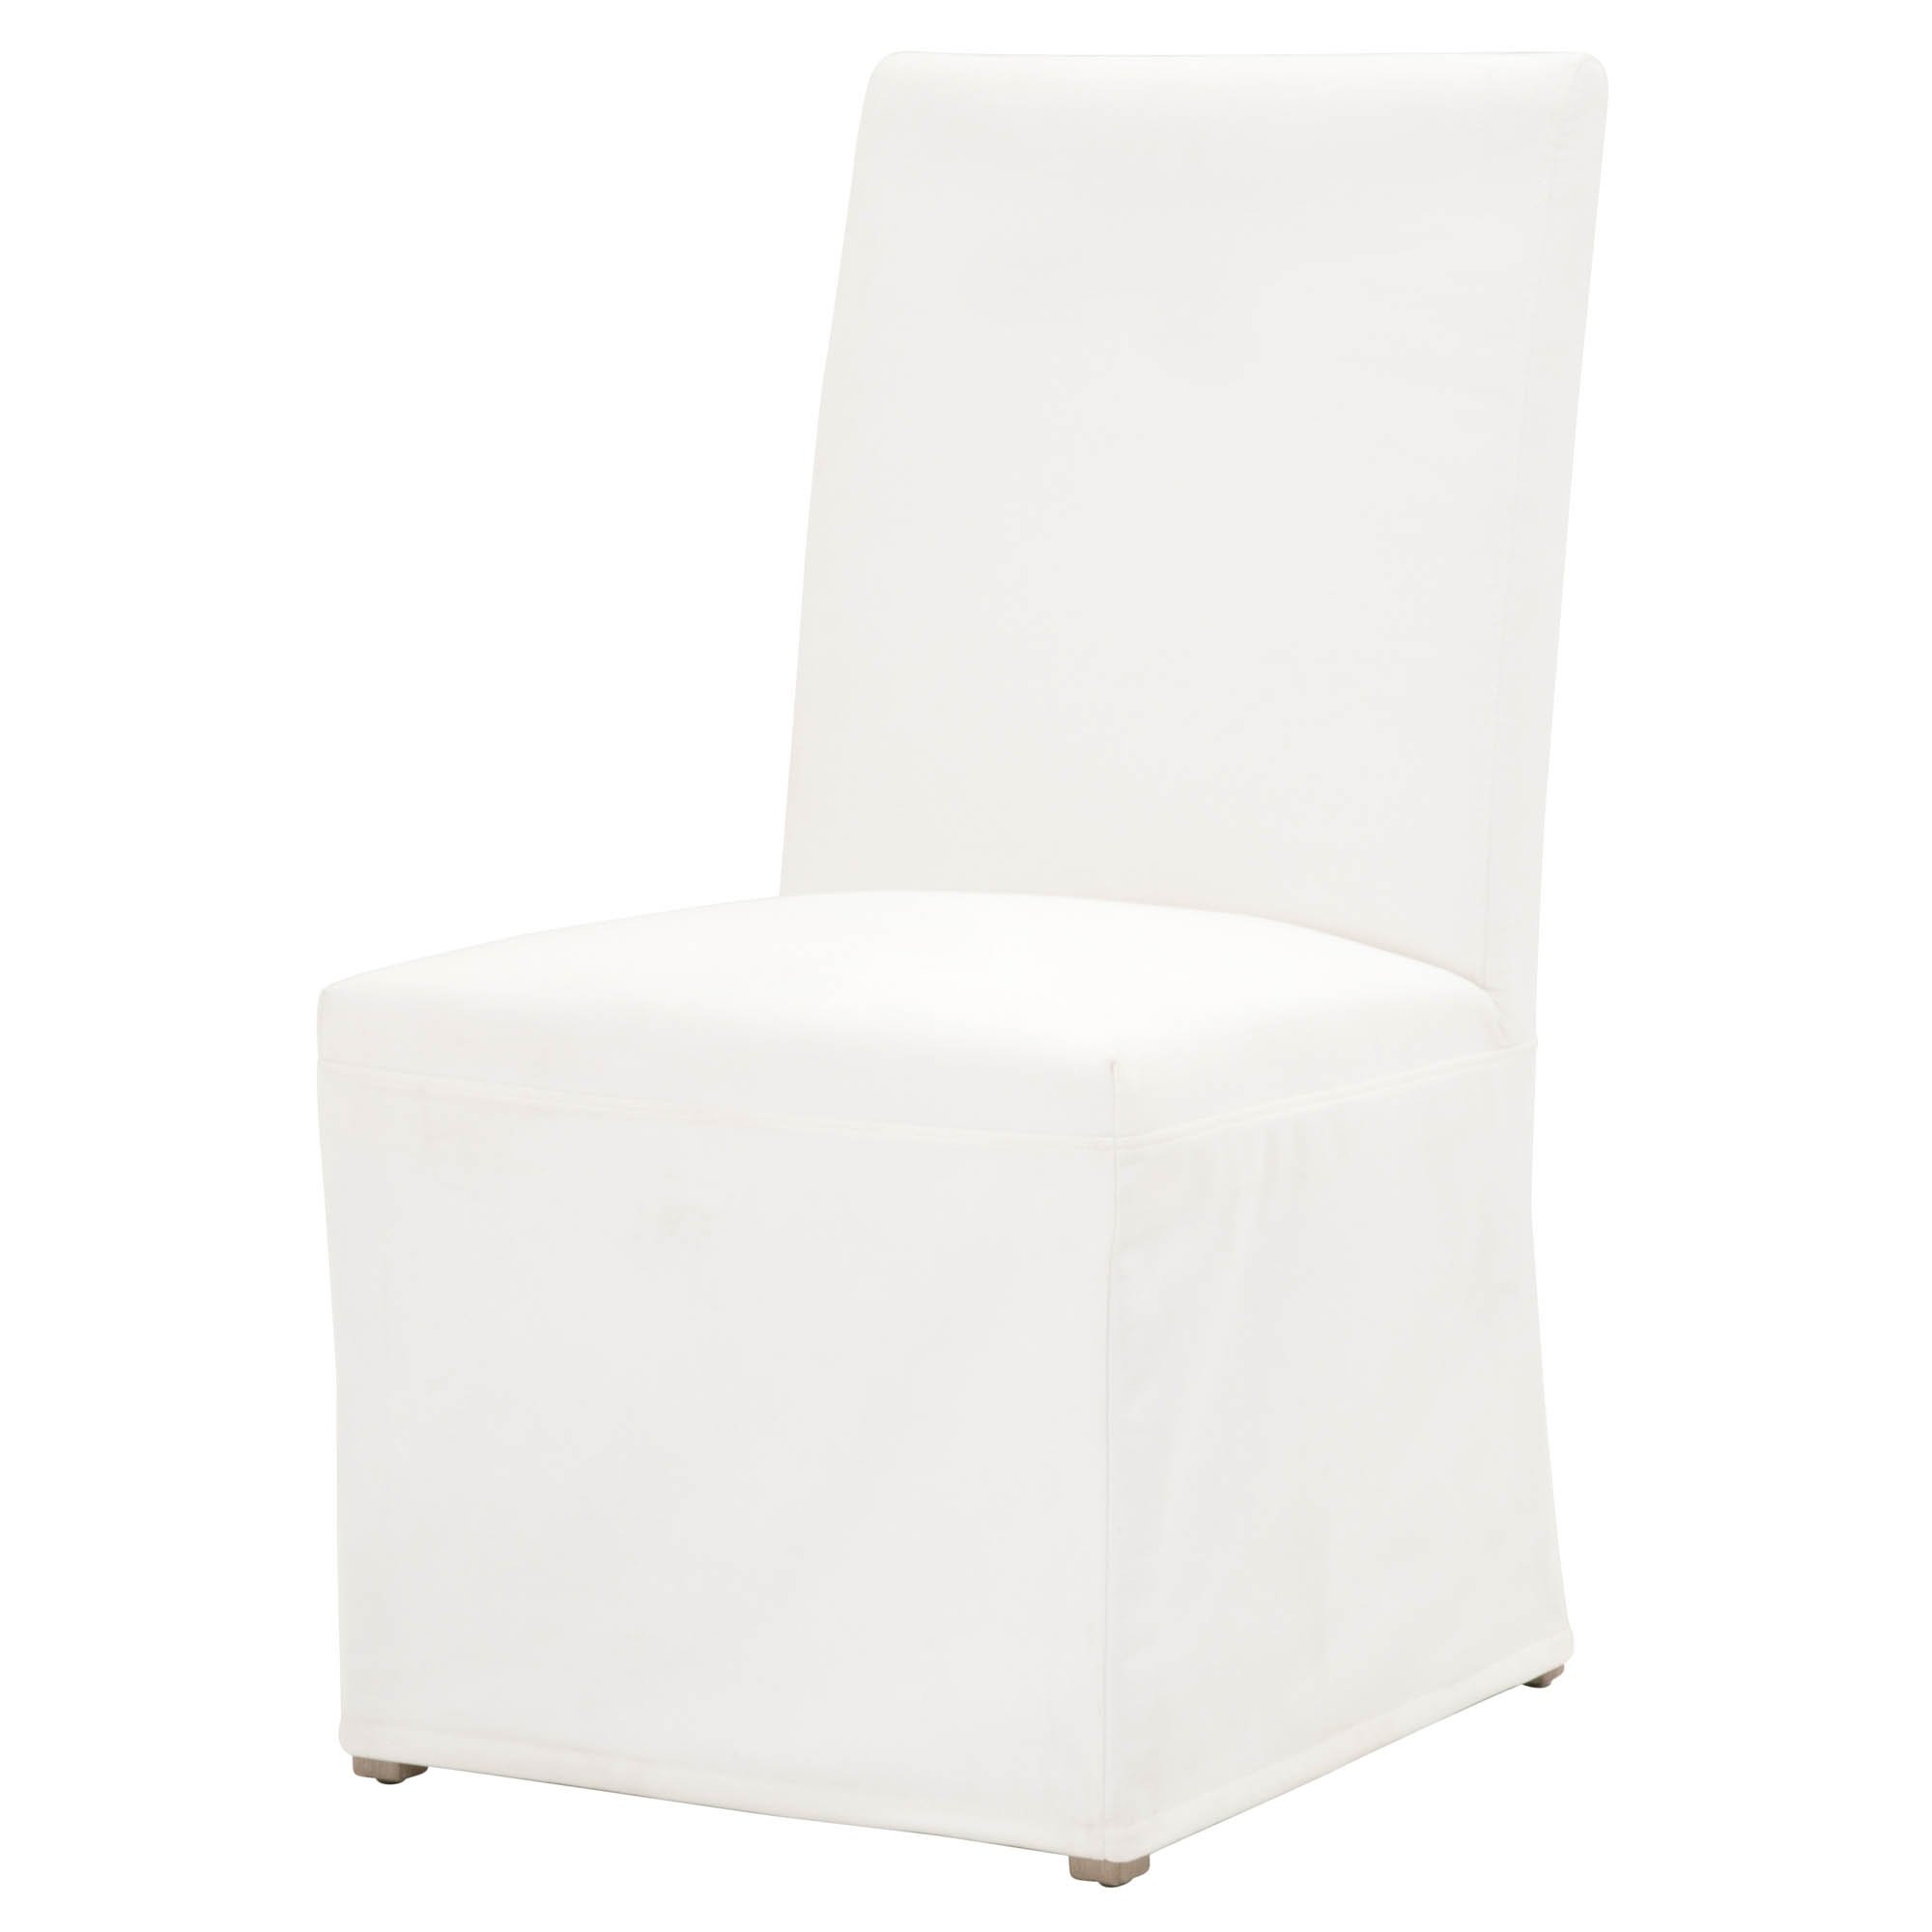 Levi Slipcover Dining Chair, Set of 2 - Image 4